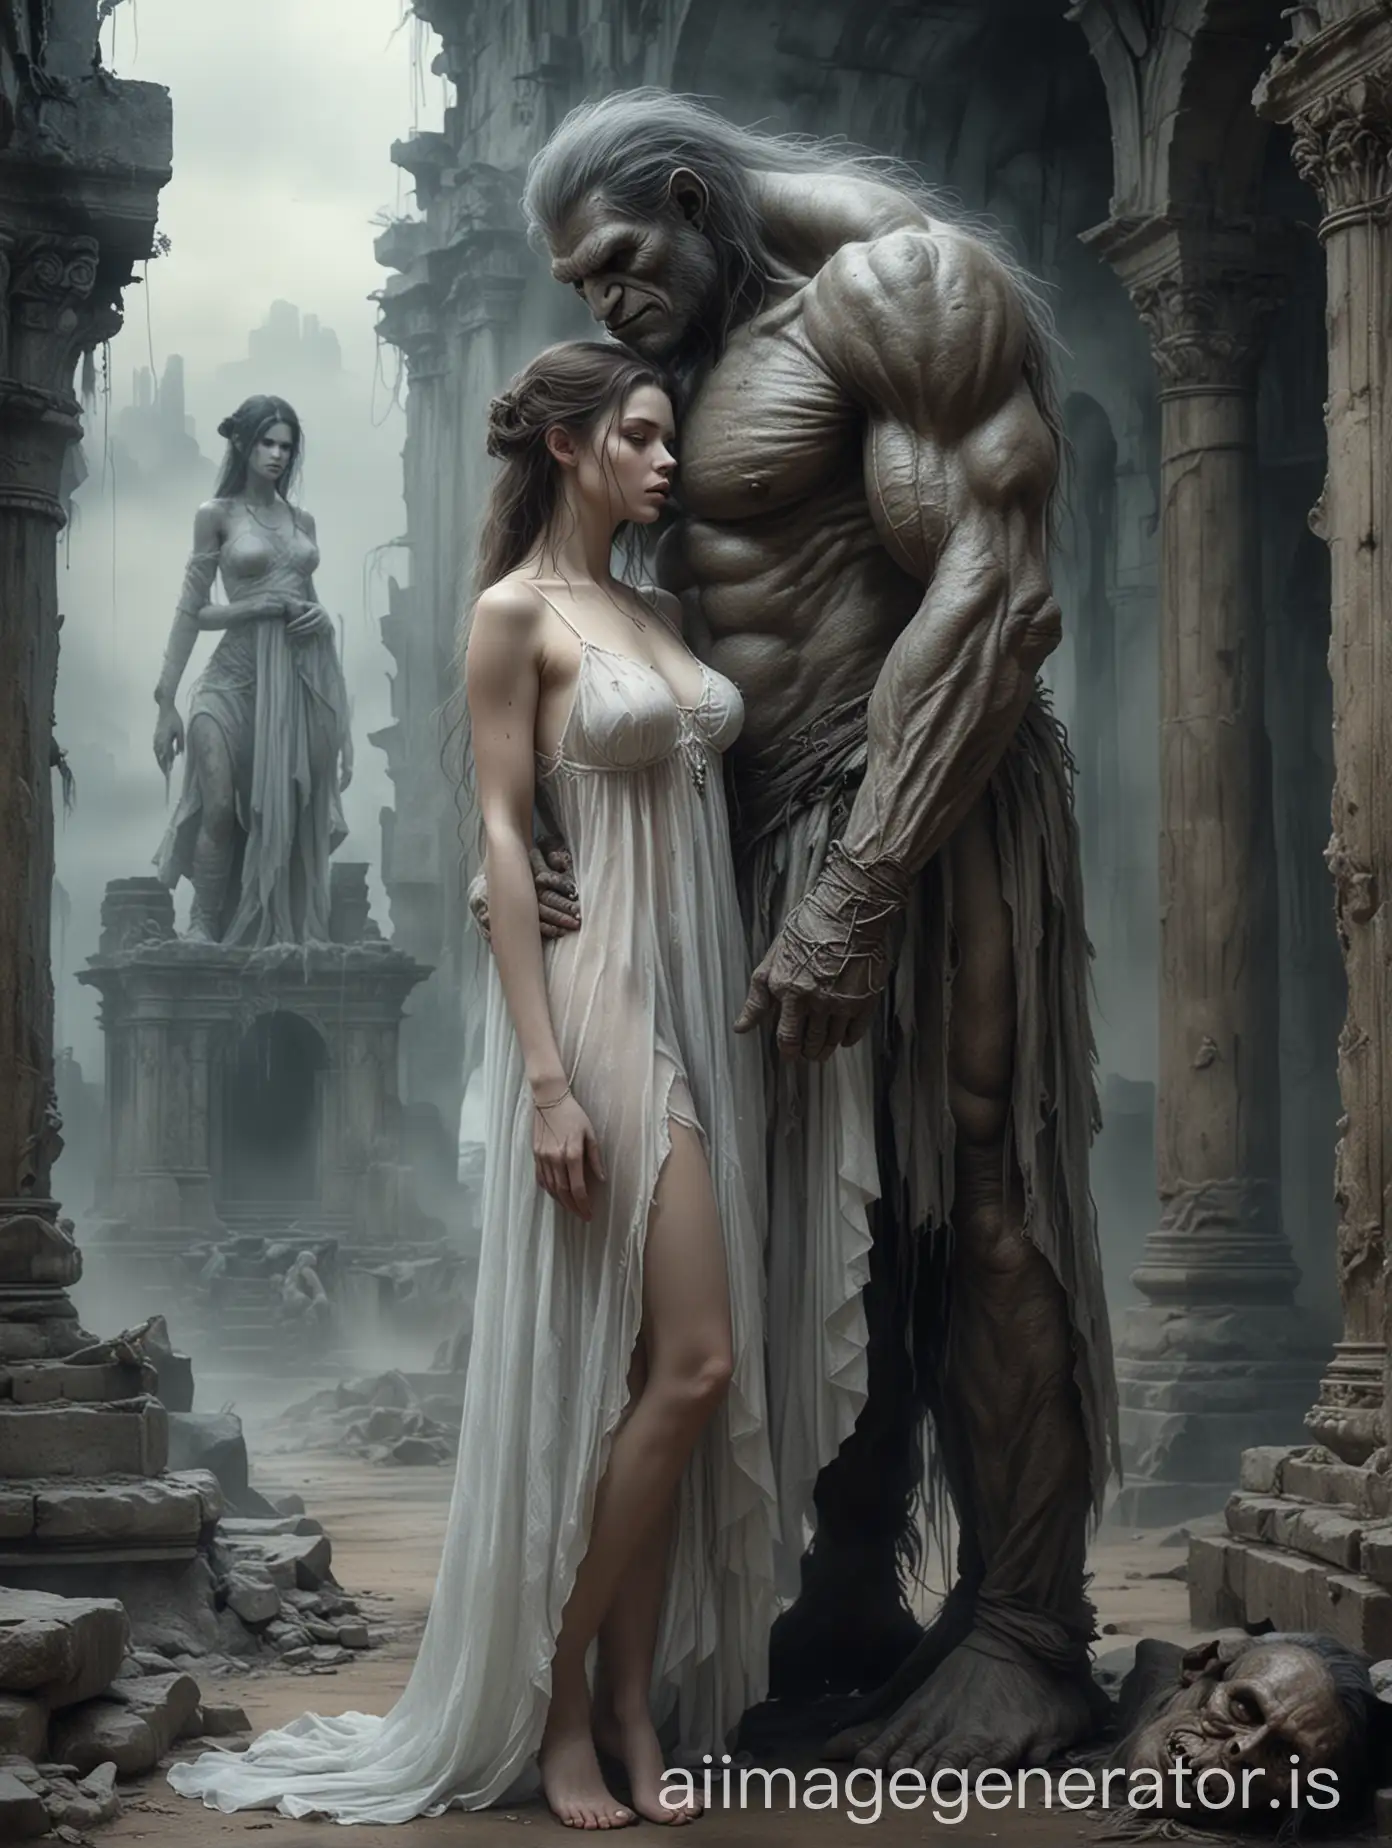 portrait, luis royo dark art style, anya taylor-joy face, tall huge troll man creature and woman in love,  troll man grabbing woman's leg with his huge hand, woman in translucent nightgown,  ancient ruins blurry foggy background